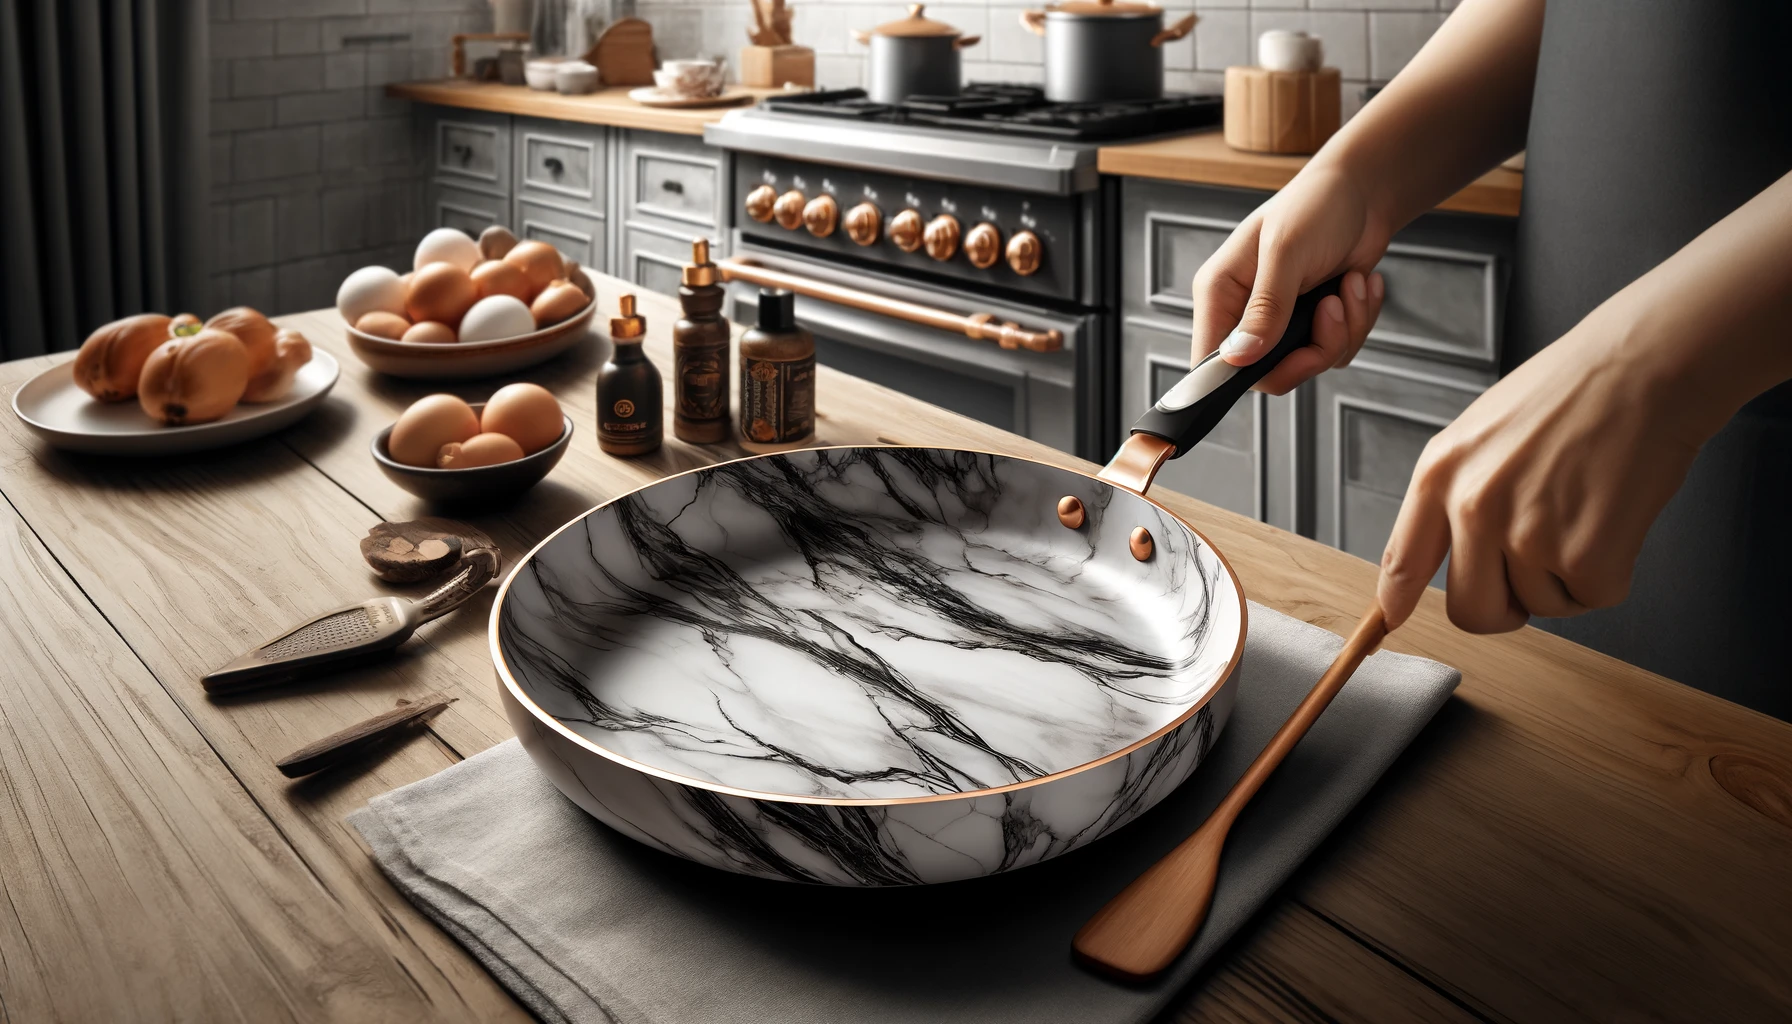 Marble Coating: Is Cooking with a Marble-Coated Pan Safe?